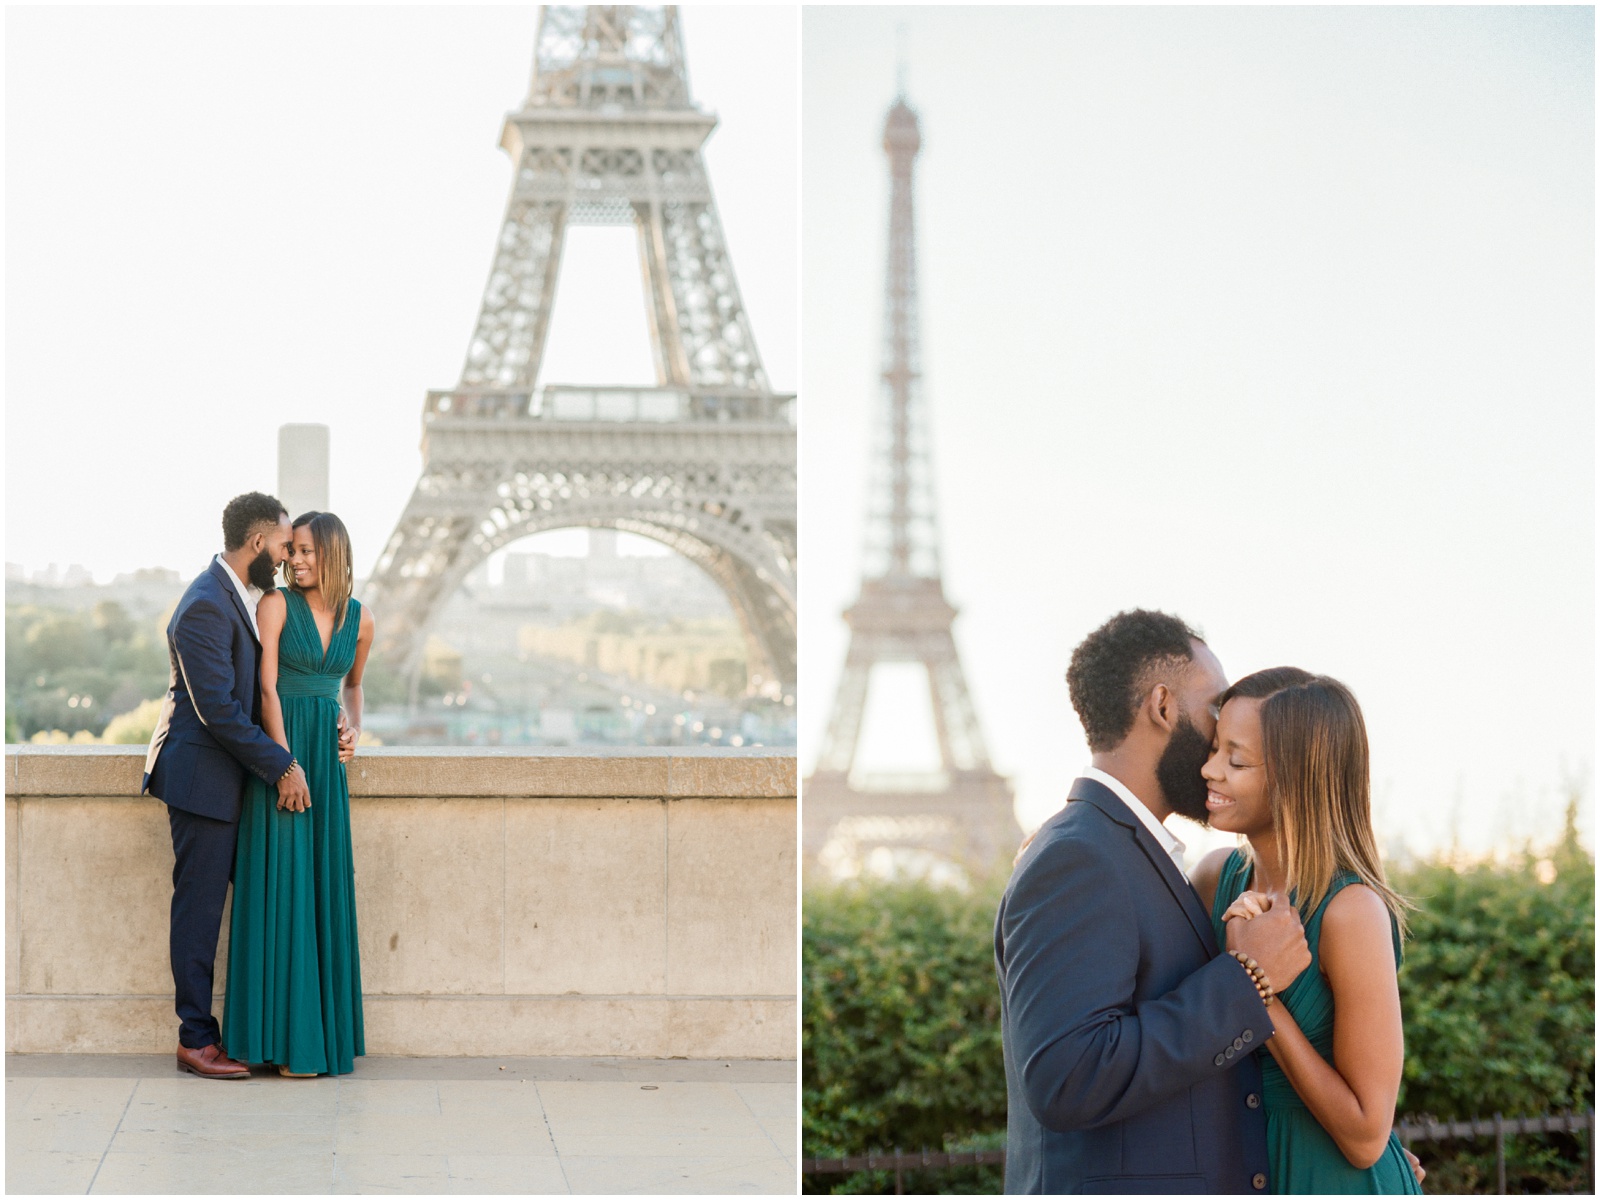 Engagement session at the Eiffel Tower in Paris